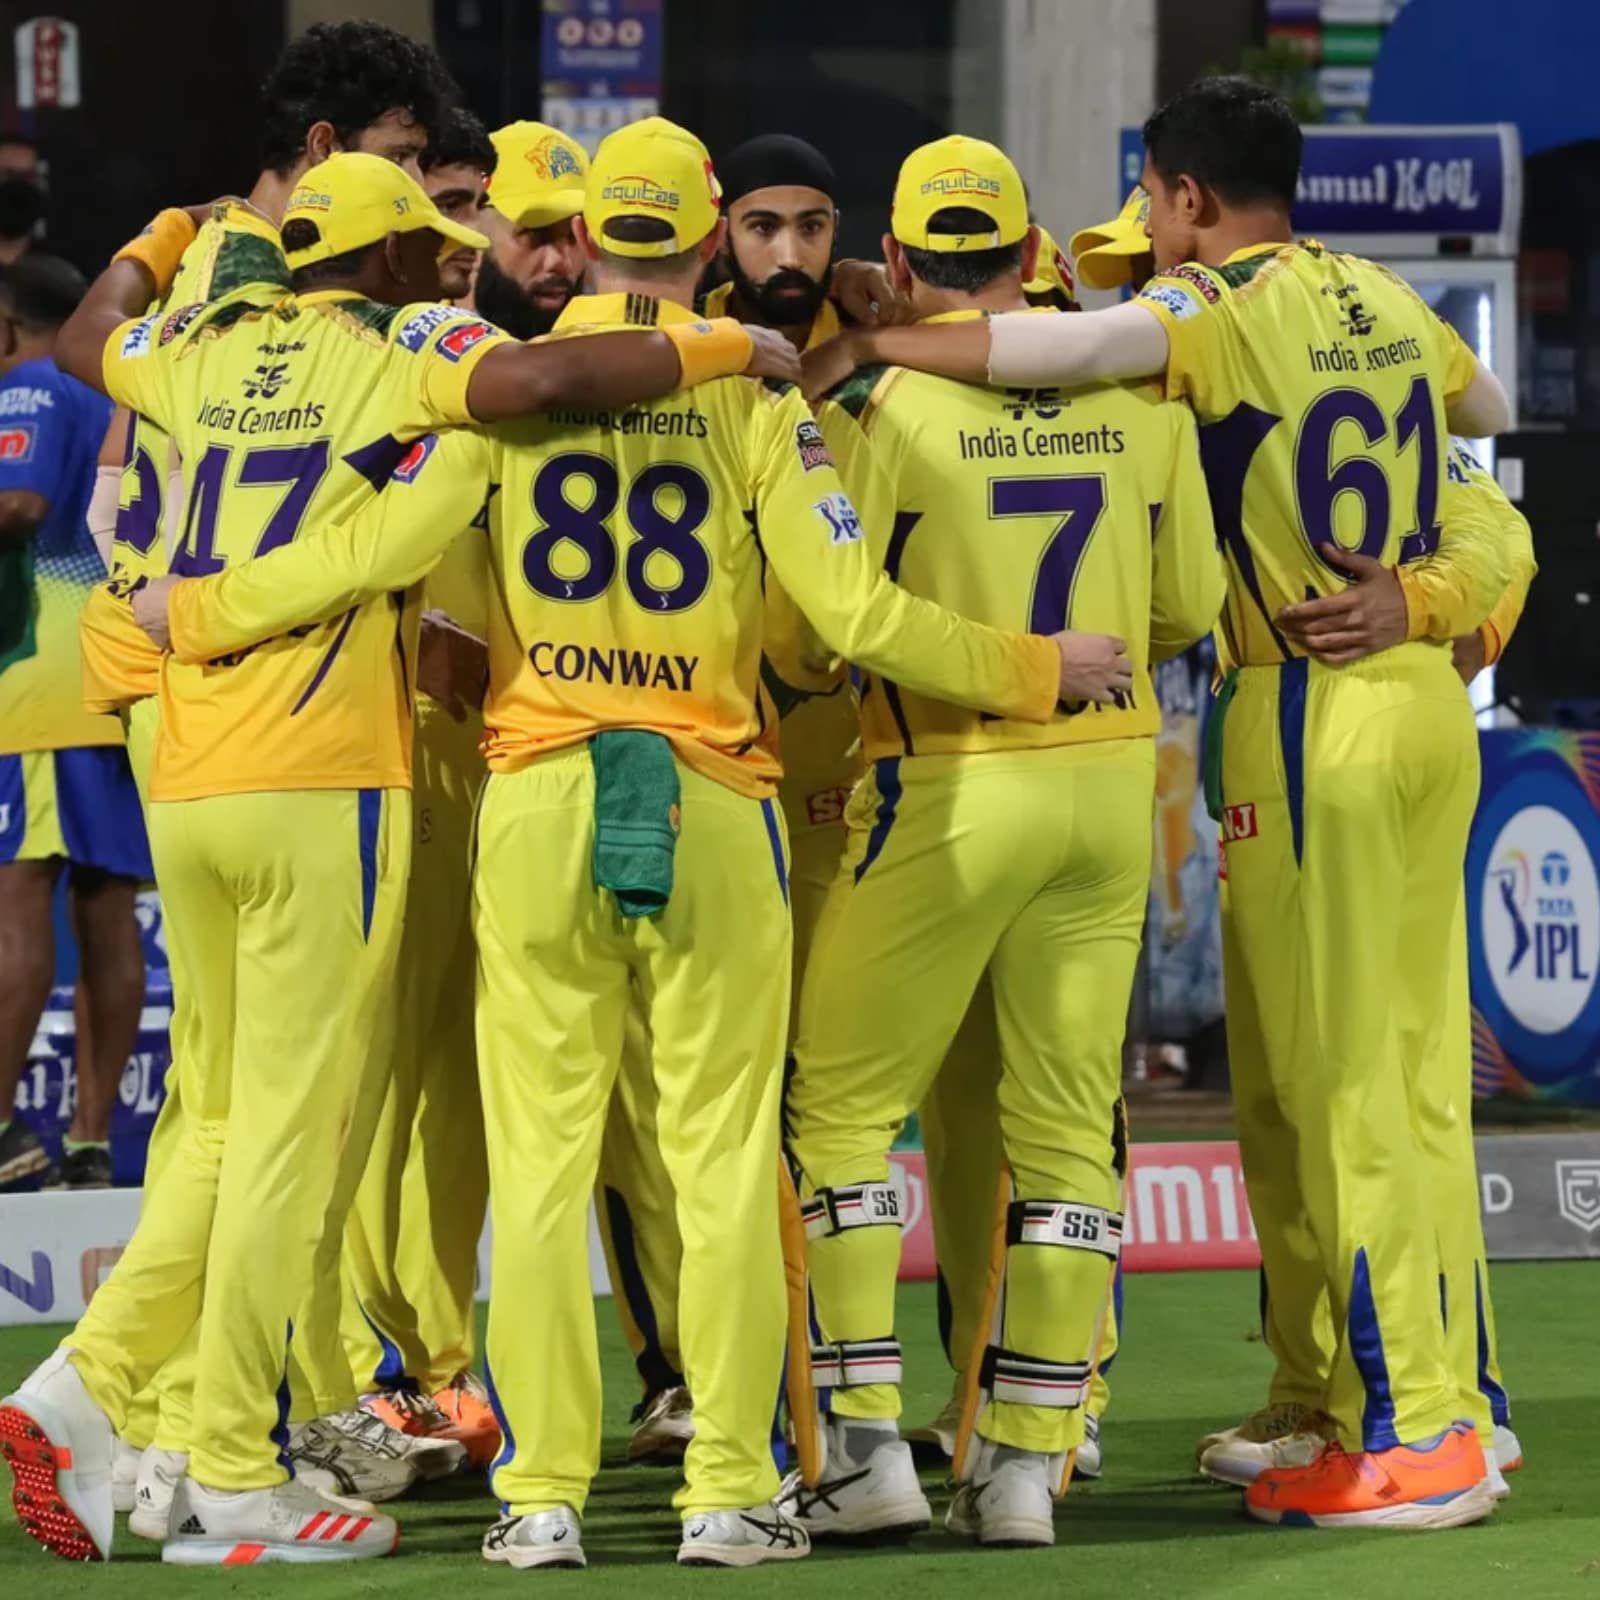 IPL 2021 auction preview: Chennai Super Kings squad details, purse remaining  and more